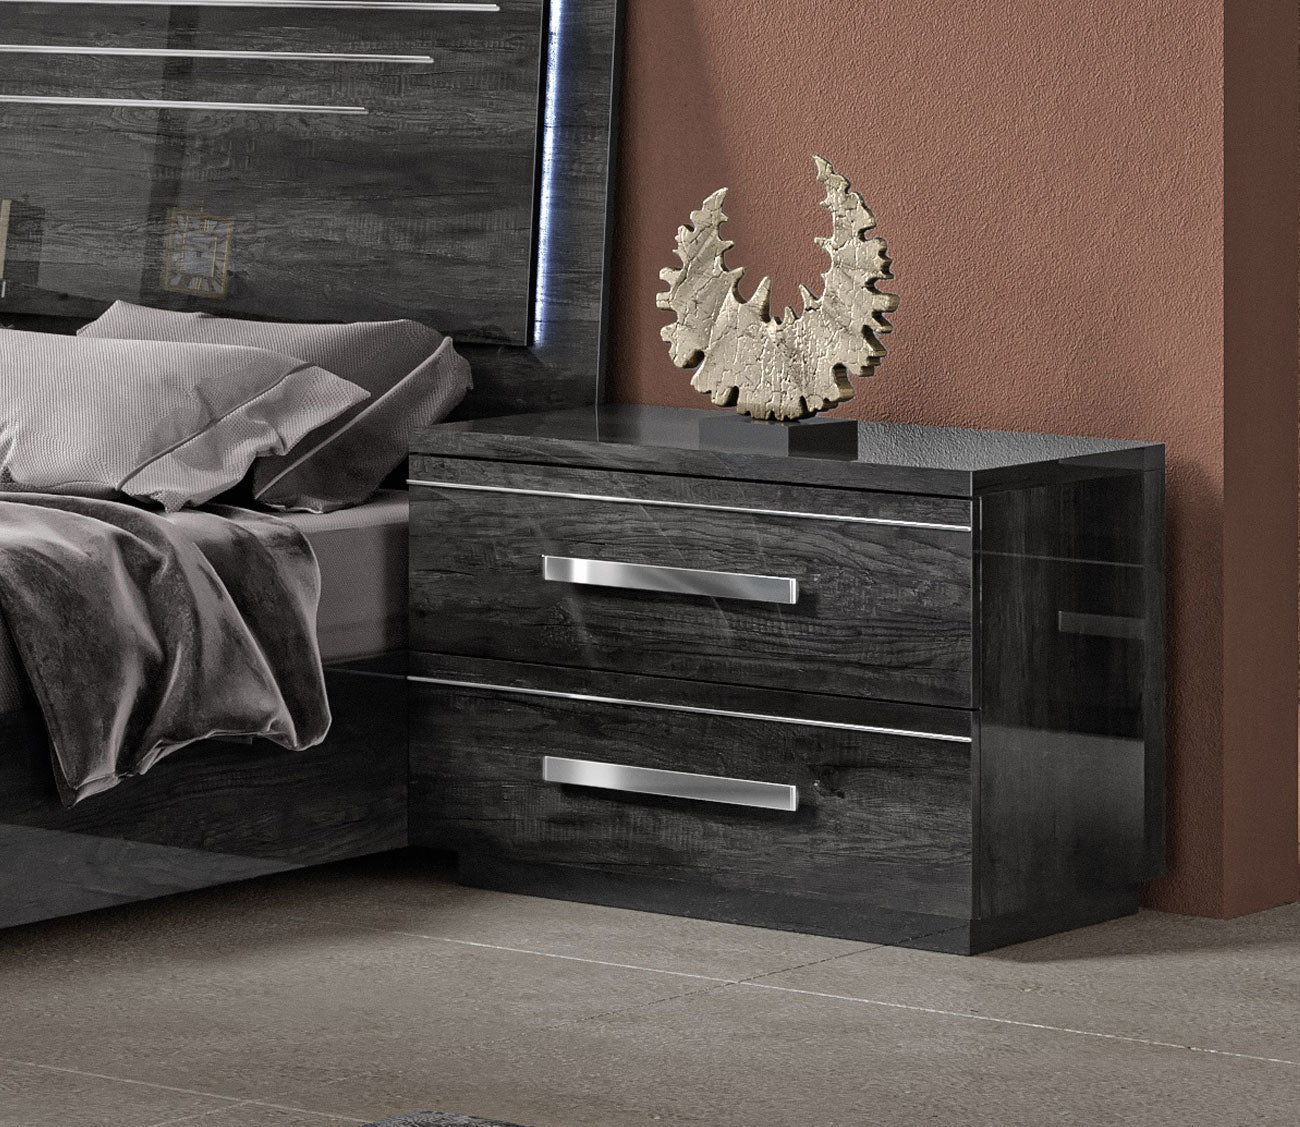 Palermo Palmi Lacquered 2-Drawer Nightstand by NCA Designs